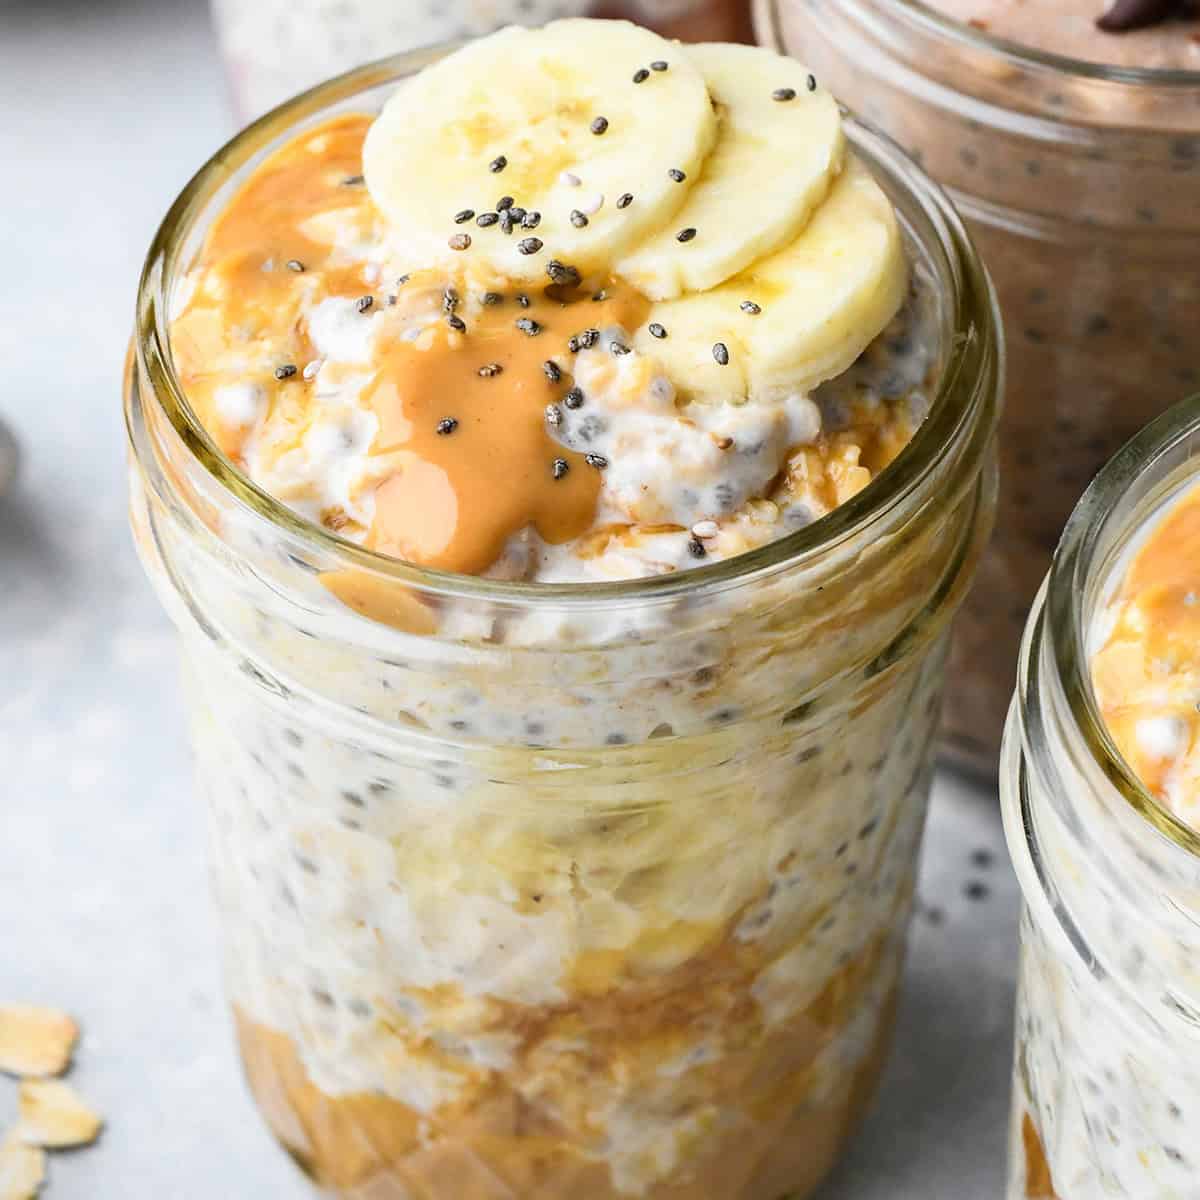 Peanut Butter Overnight Oats in a glass jar topped with bananas, chia seeds and more peanut butter